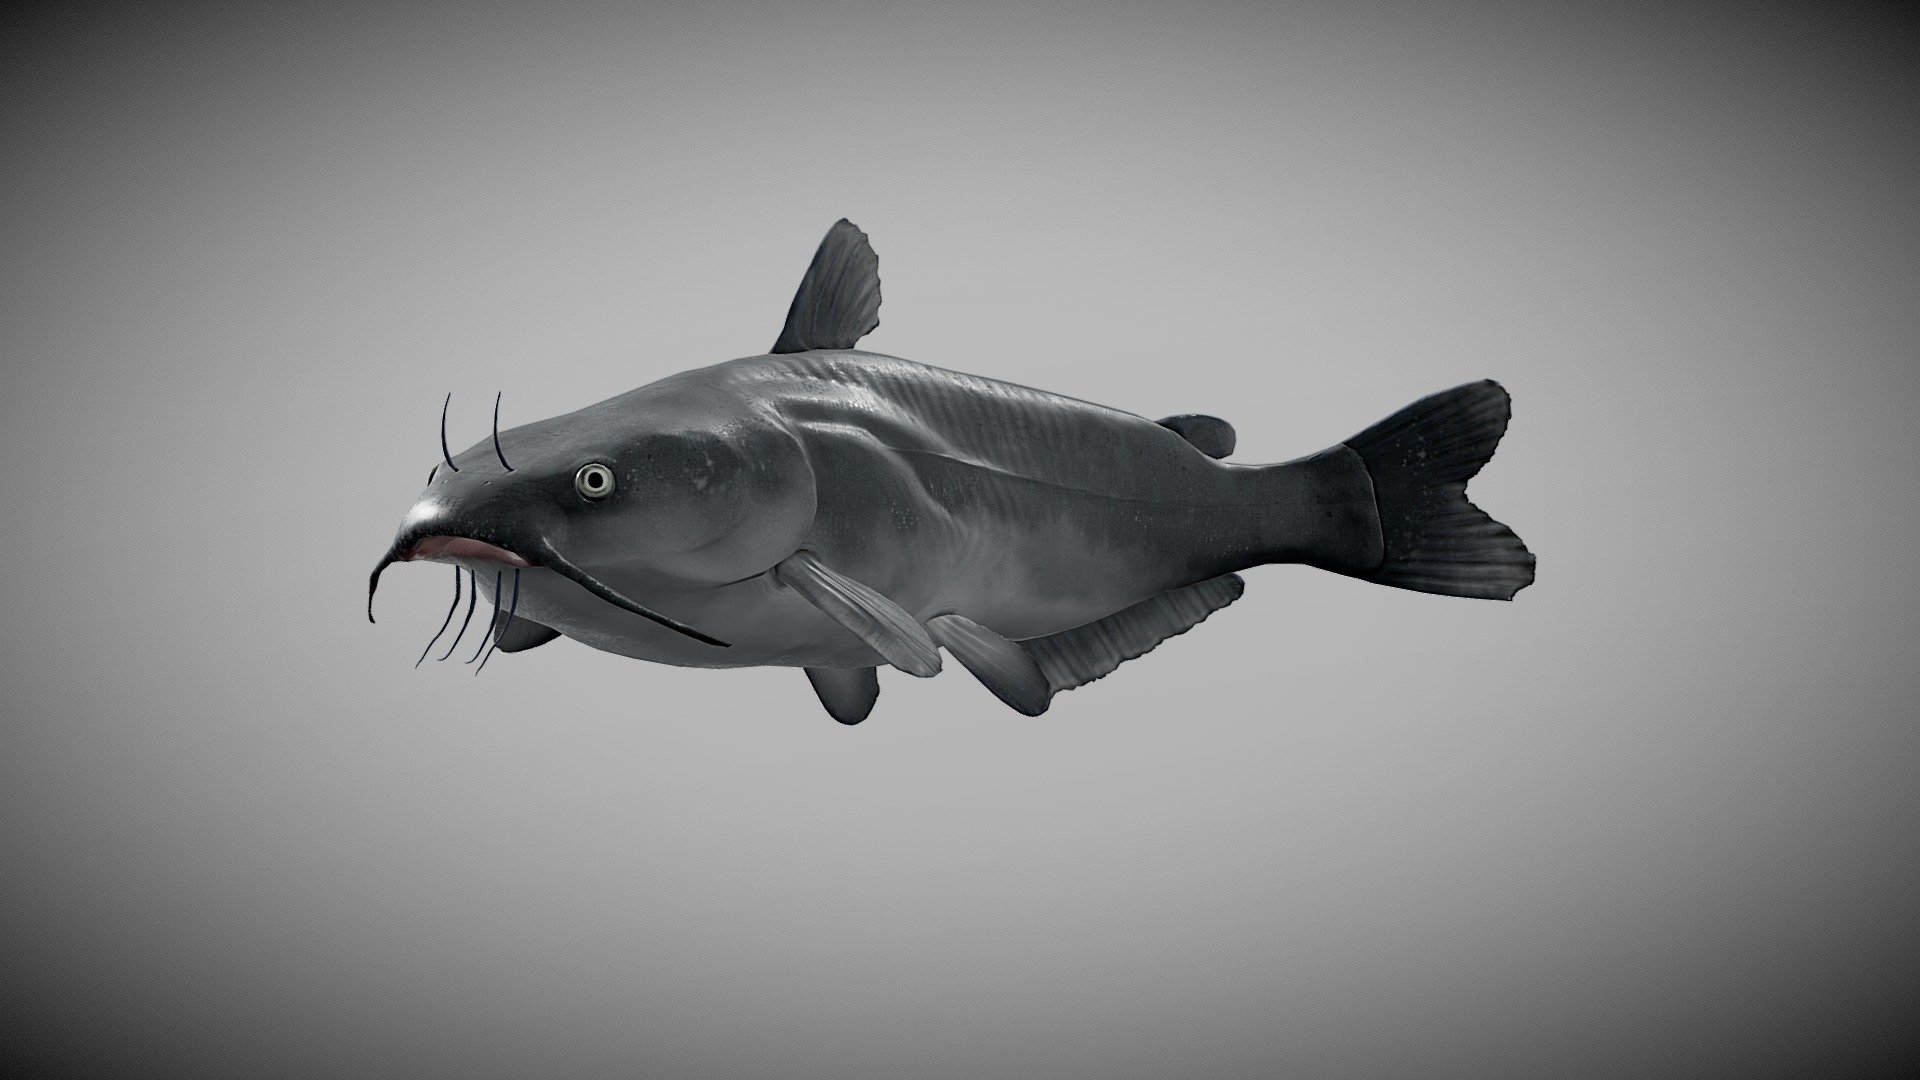 Blue catfish, created in Blender, Zbrush Core and Substance Painter original blender file in the Zip folder uploaded!

Textures 4096x4096:* - body: albedo, roughness, Ambient occlusion, normal - eyes and fins: albedo, roughness, Ambient occlusion, normal, opacity - mane and tail: color node, normal and opacity

Original Blender file with PBR materials in the zip file

wiki: The blue catfish (Ictalurus furcatus) is a large species of North American catfish, reaching a length of 65 in (170 cm) and a weight of 165 lb (75 kg). The continent’s largest, it can live to 20 years, with a typical fish being between 25–46 in (64–117 cm) and 30–70 lb (14–32 kg). Native distribution is primarily in the Mississippi River and Louisiana drainage systems, including the Missouri, Ohio, Tennessee, and Arkansas Rivers, the Des Moines River in south-central Iowa, the Rio Grande, and south along the Gulf Coast to Belize and Guatemala 3d model